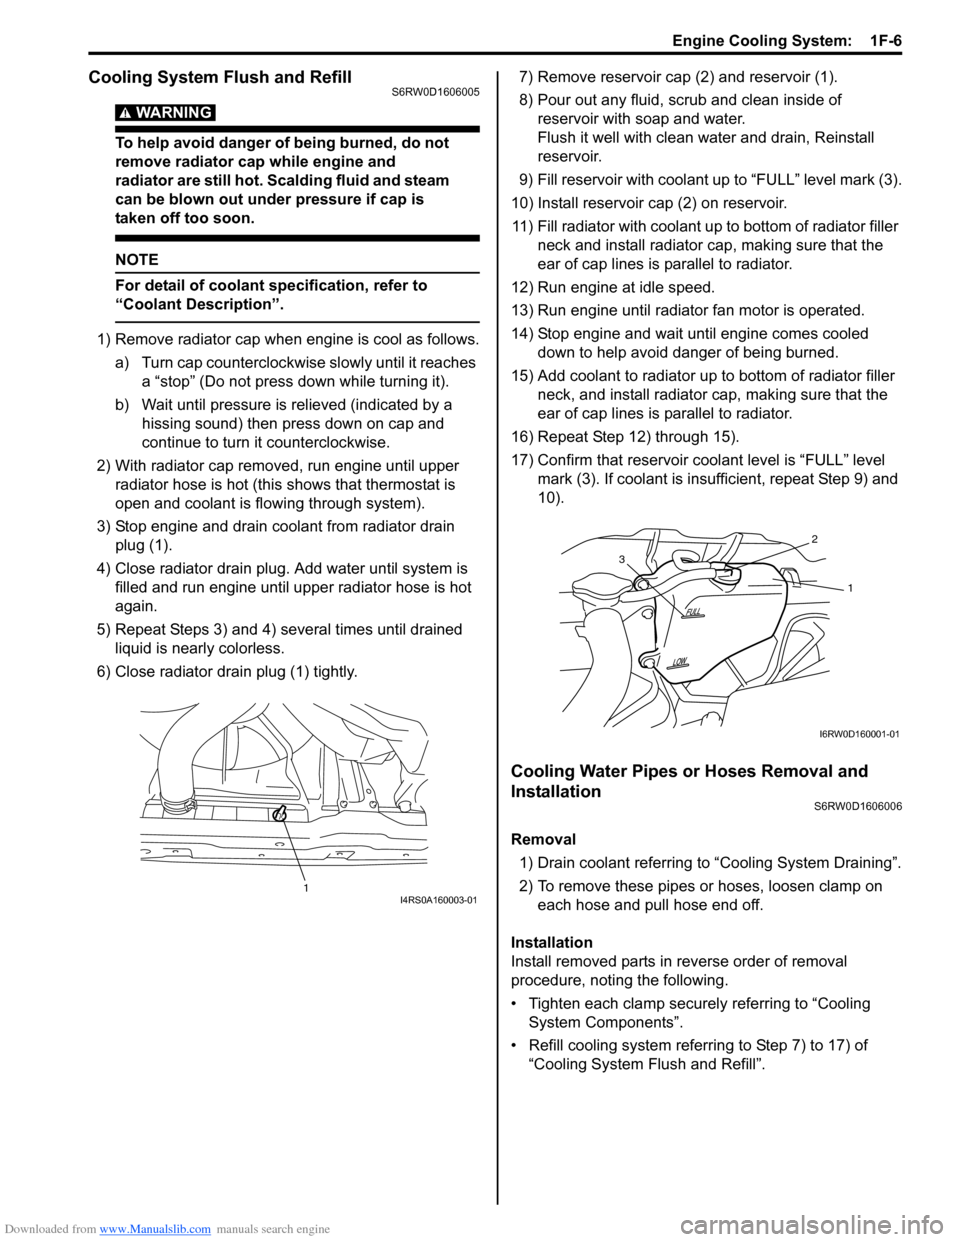 SUZUKI SX4 2006 1.G Service Workshop Manual Downloaded from www.Manualslib.com manuals search engine Engine Cooling System:  1F-6
Cooling System Flush and RefillS6RW0D1606005
WARNING! 
To help avoid danger of being burned, do not 
remove radiat